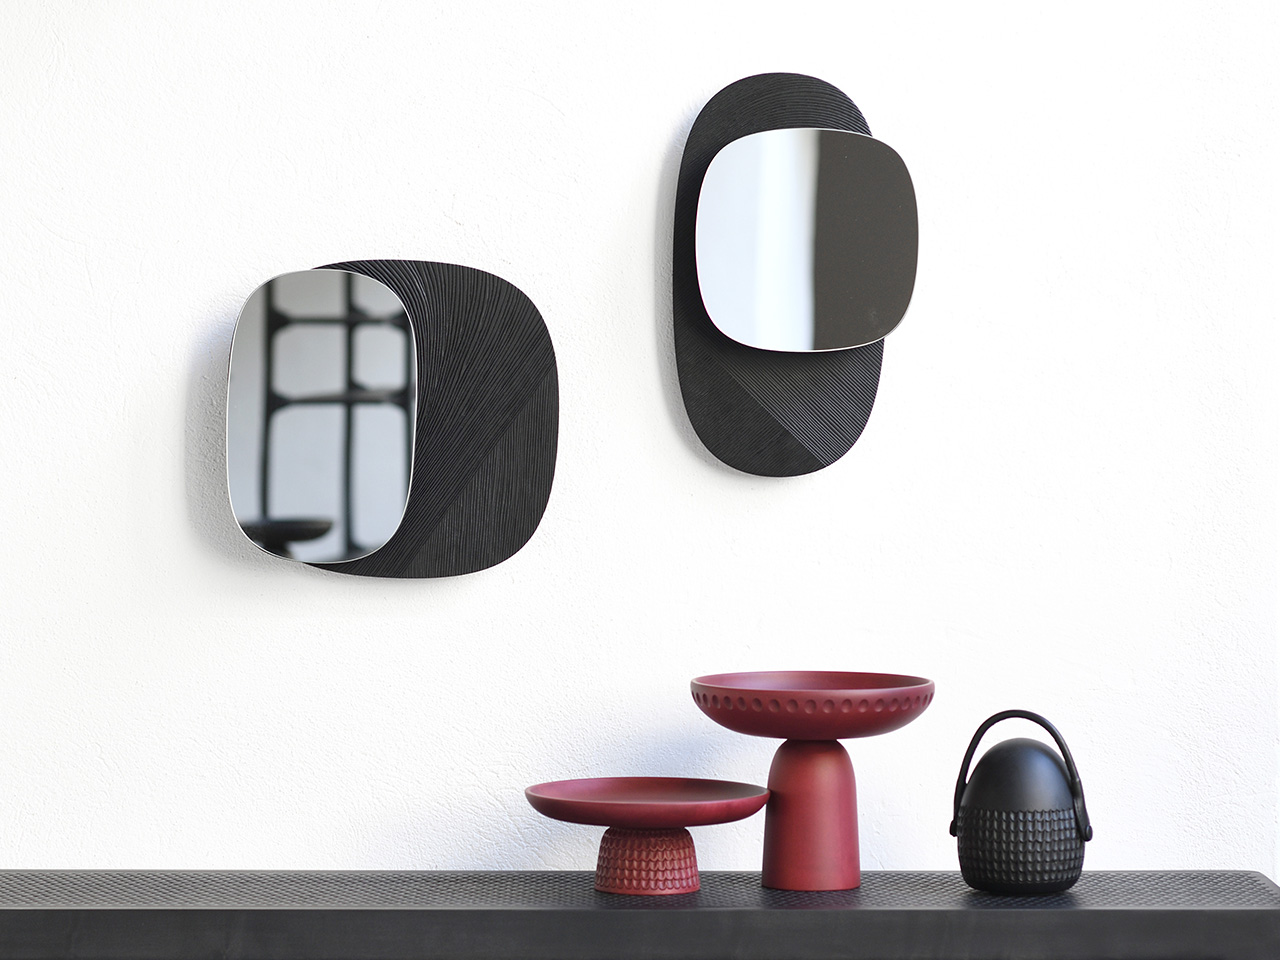 Eclipse Wall Mirrors Deliver on Artistic Function